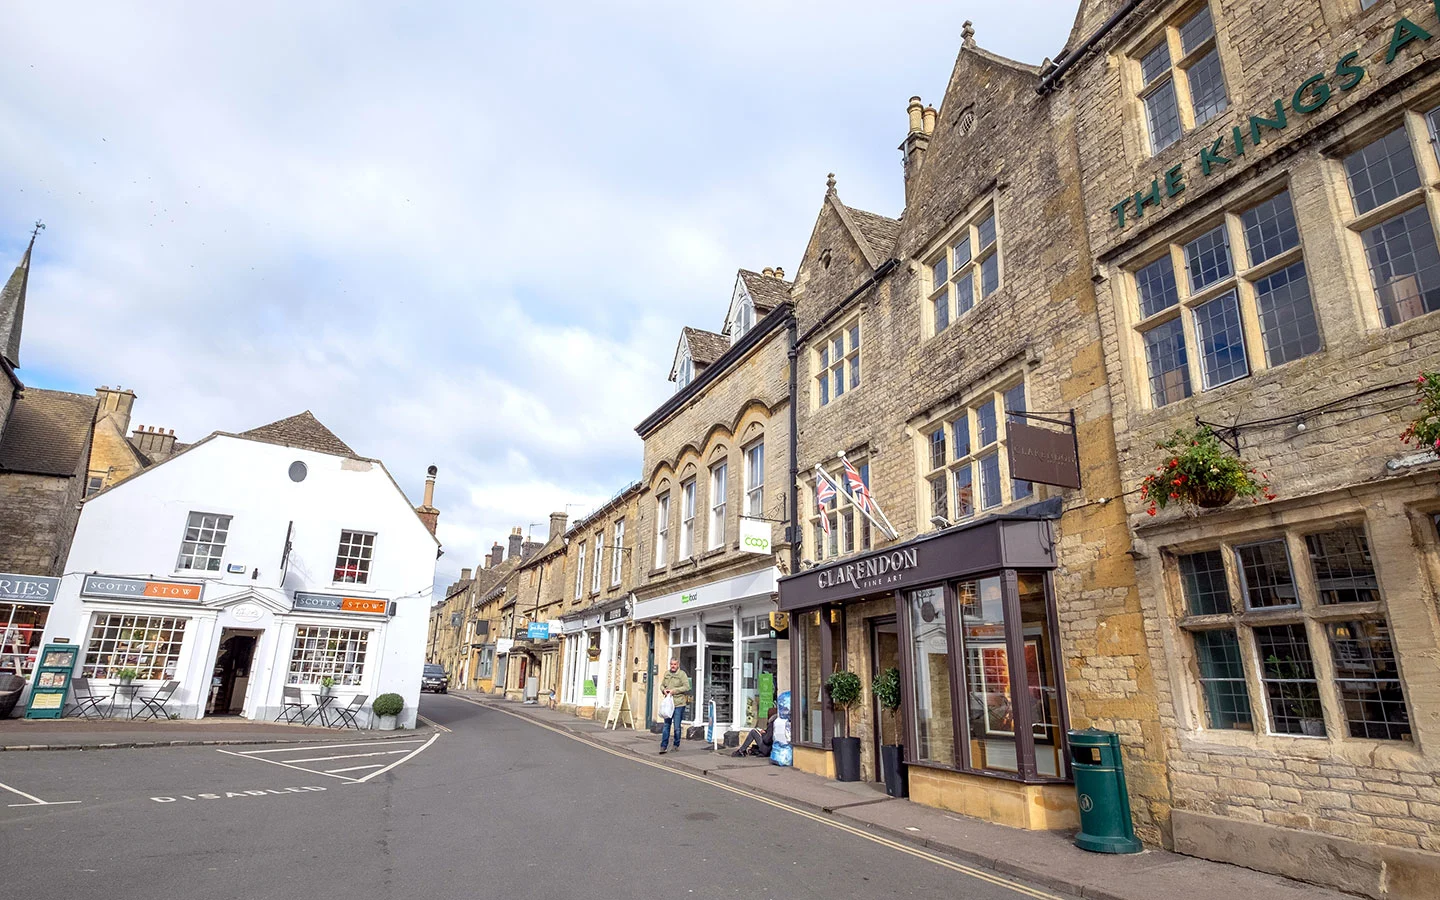 The Market Square in Stow-on-the-Wold